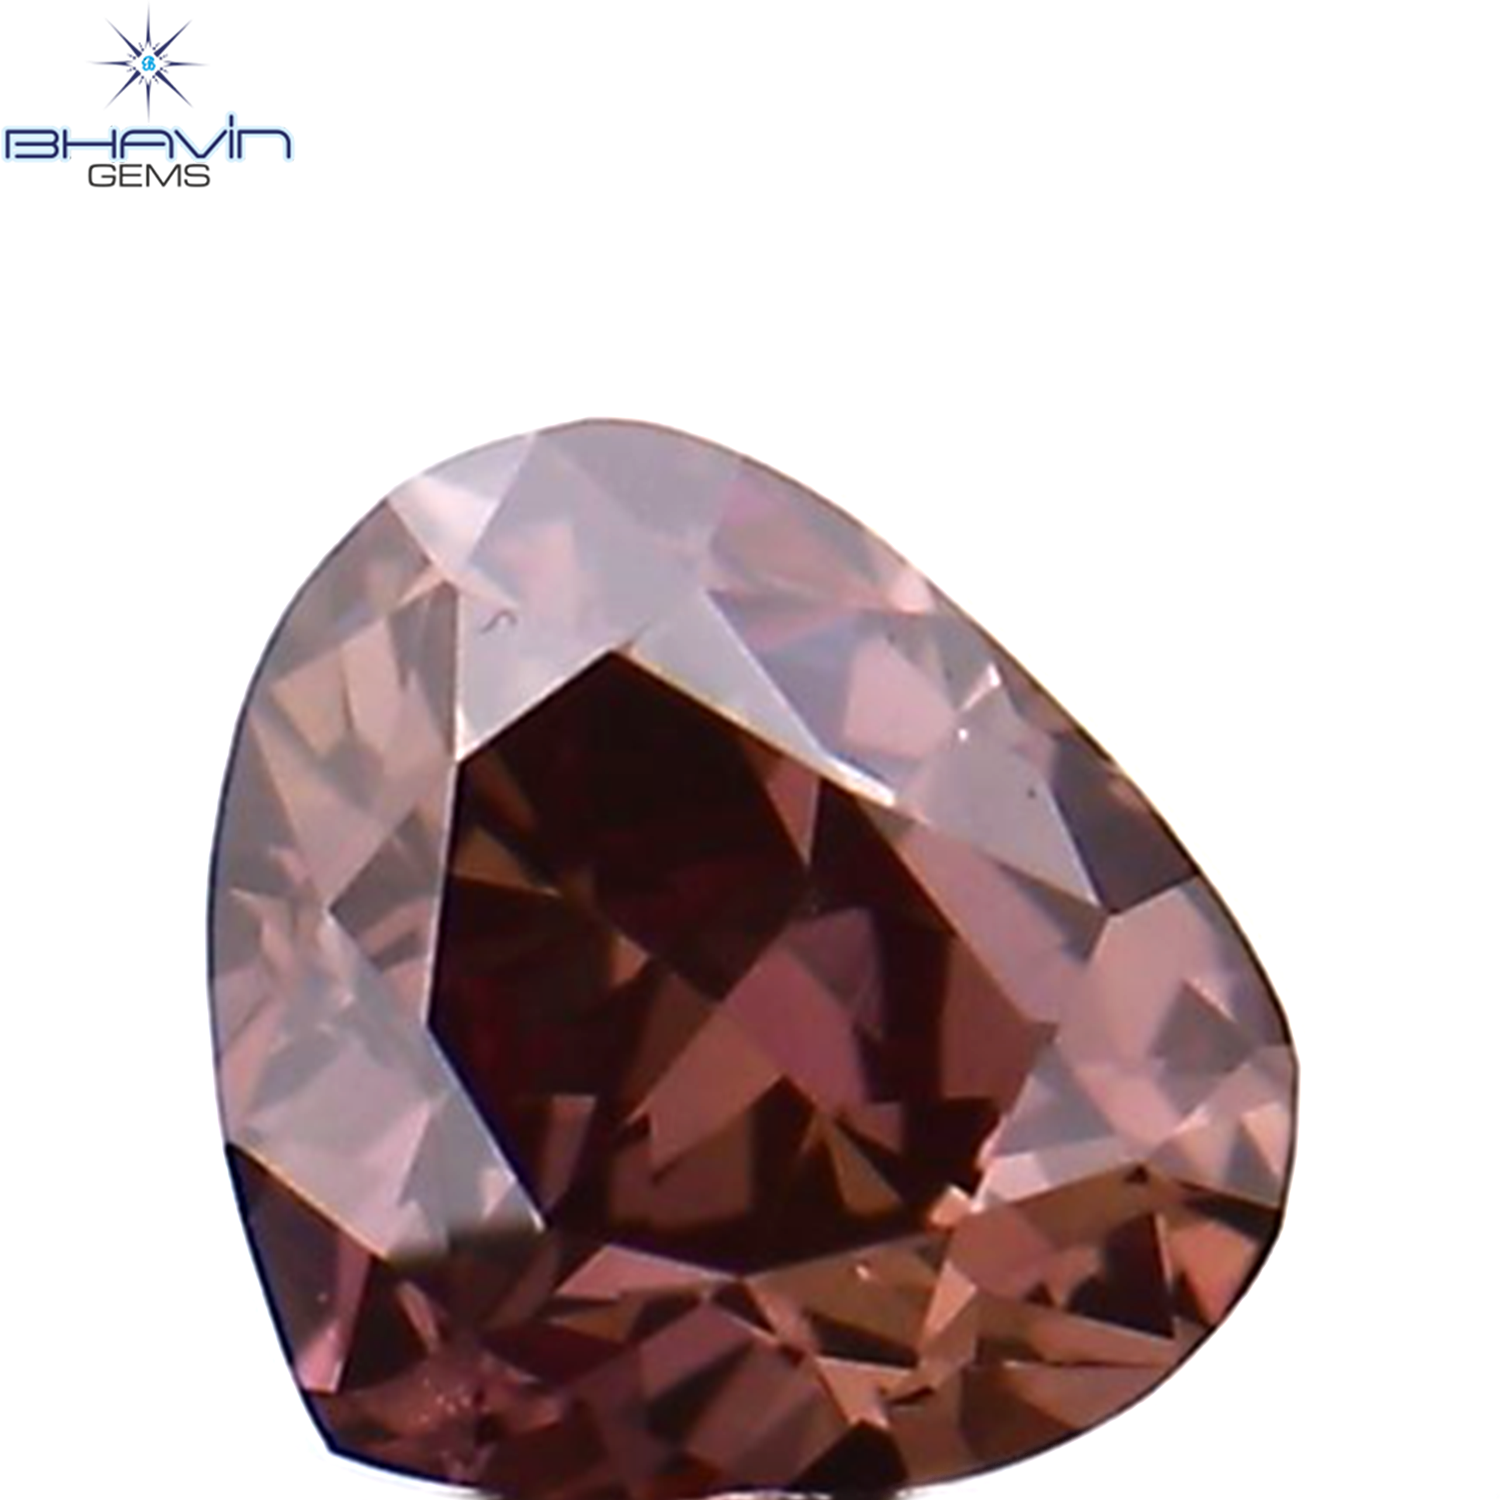 0.08 CT Heart Shape Natural Loose Diamond Pink Color VS1 Clarity (2.78 MM)